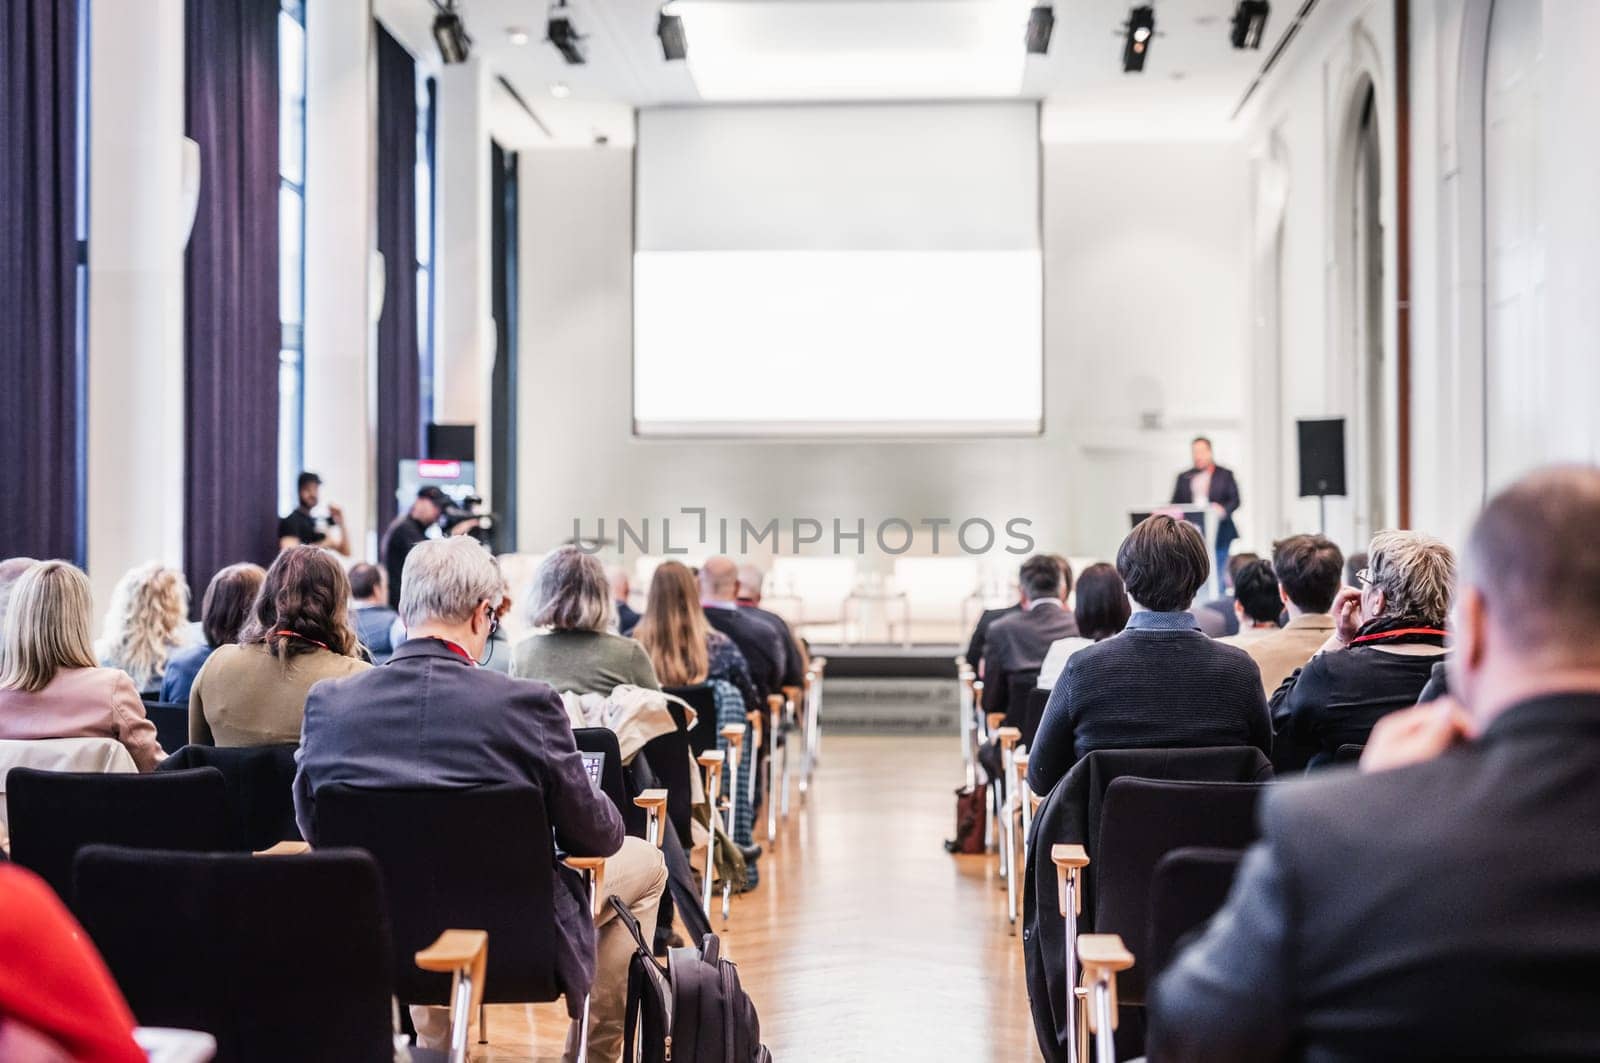 Speaker giving a talk in conference hall at business event. Rear view of unrecognizable people in audience at the conference hall. Business and entrepreneurship concept. by kasto